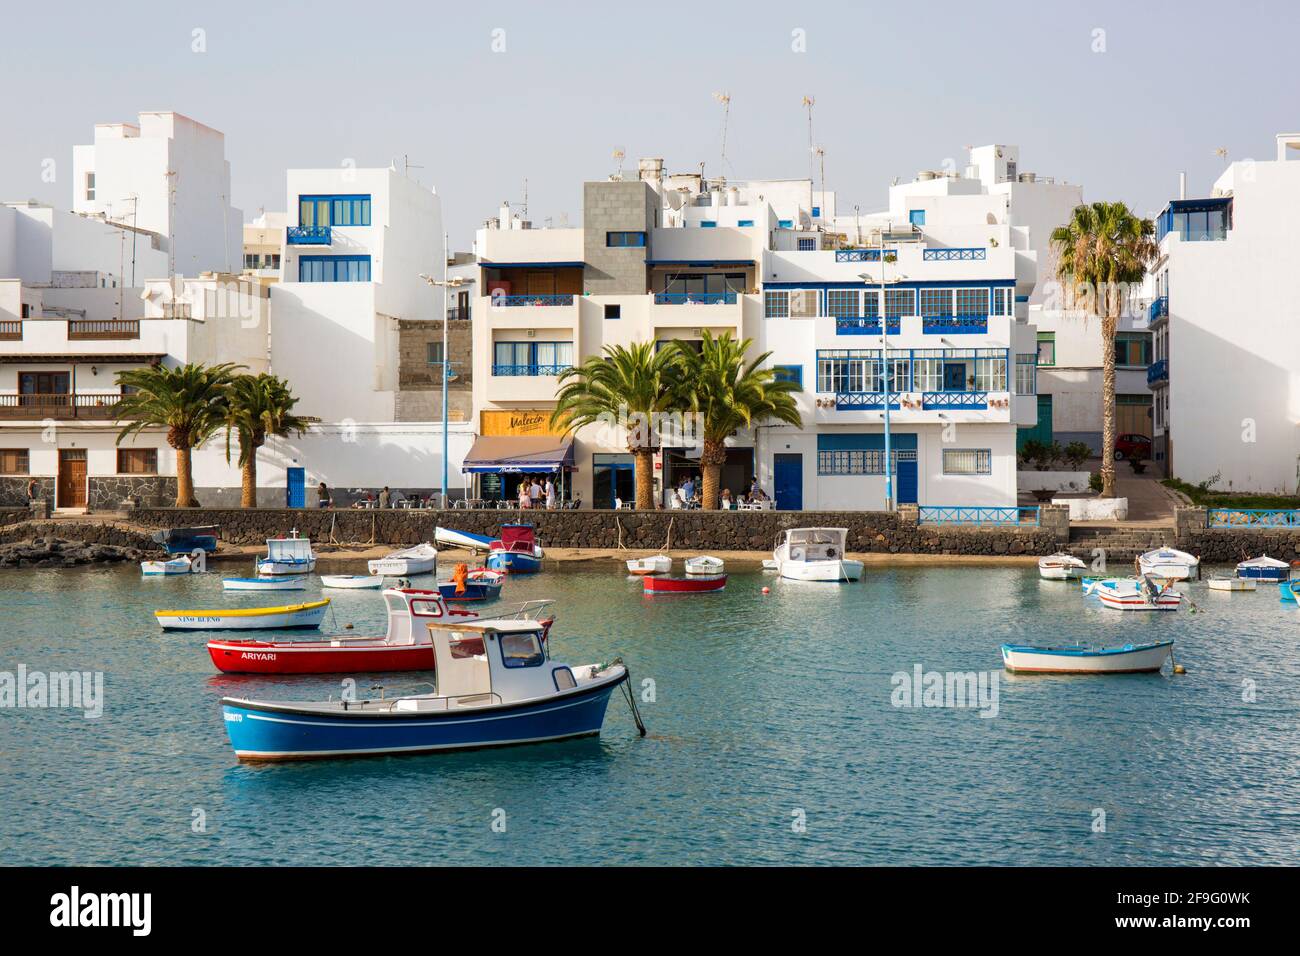 Arrecife, Lanzarote, Canary Islands, Spain. Colourful boats at anchor in the tranquil waters of the Charco de San Ginés. Stock Photo